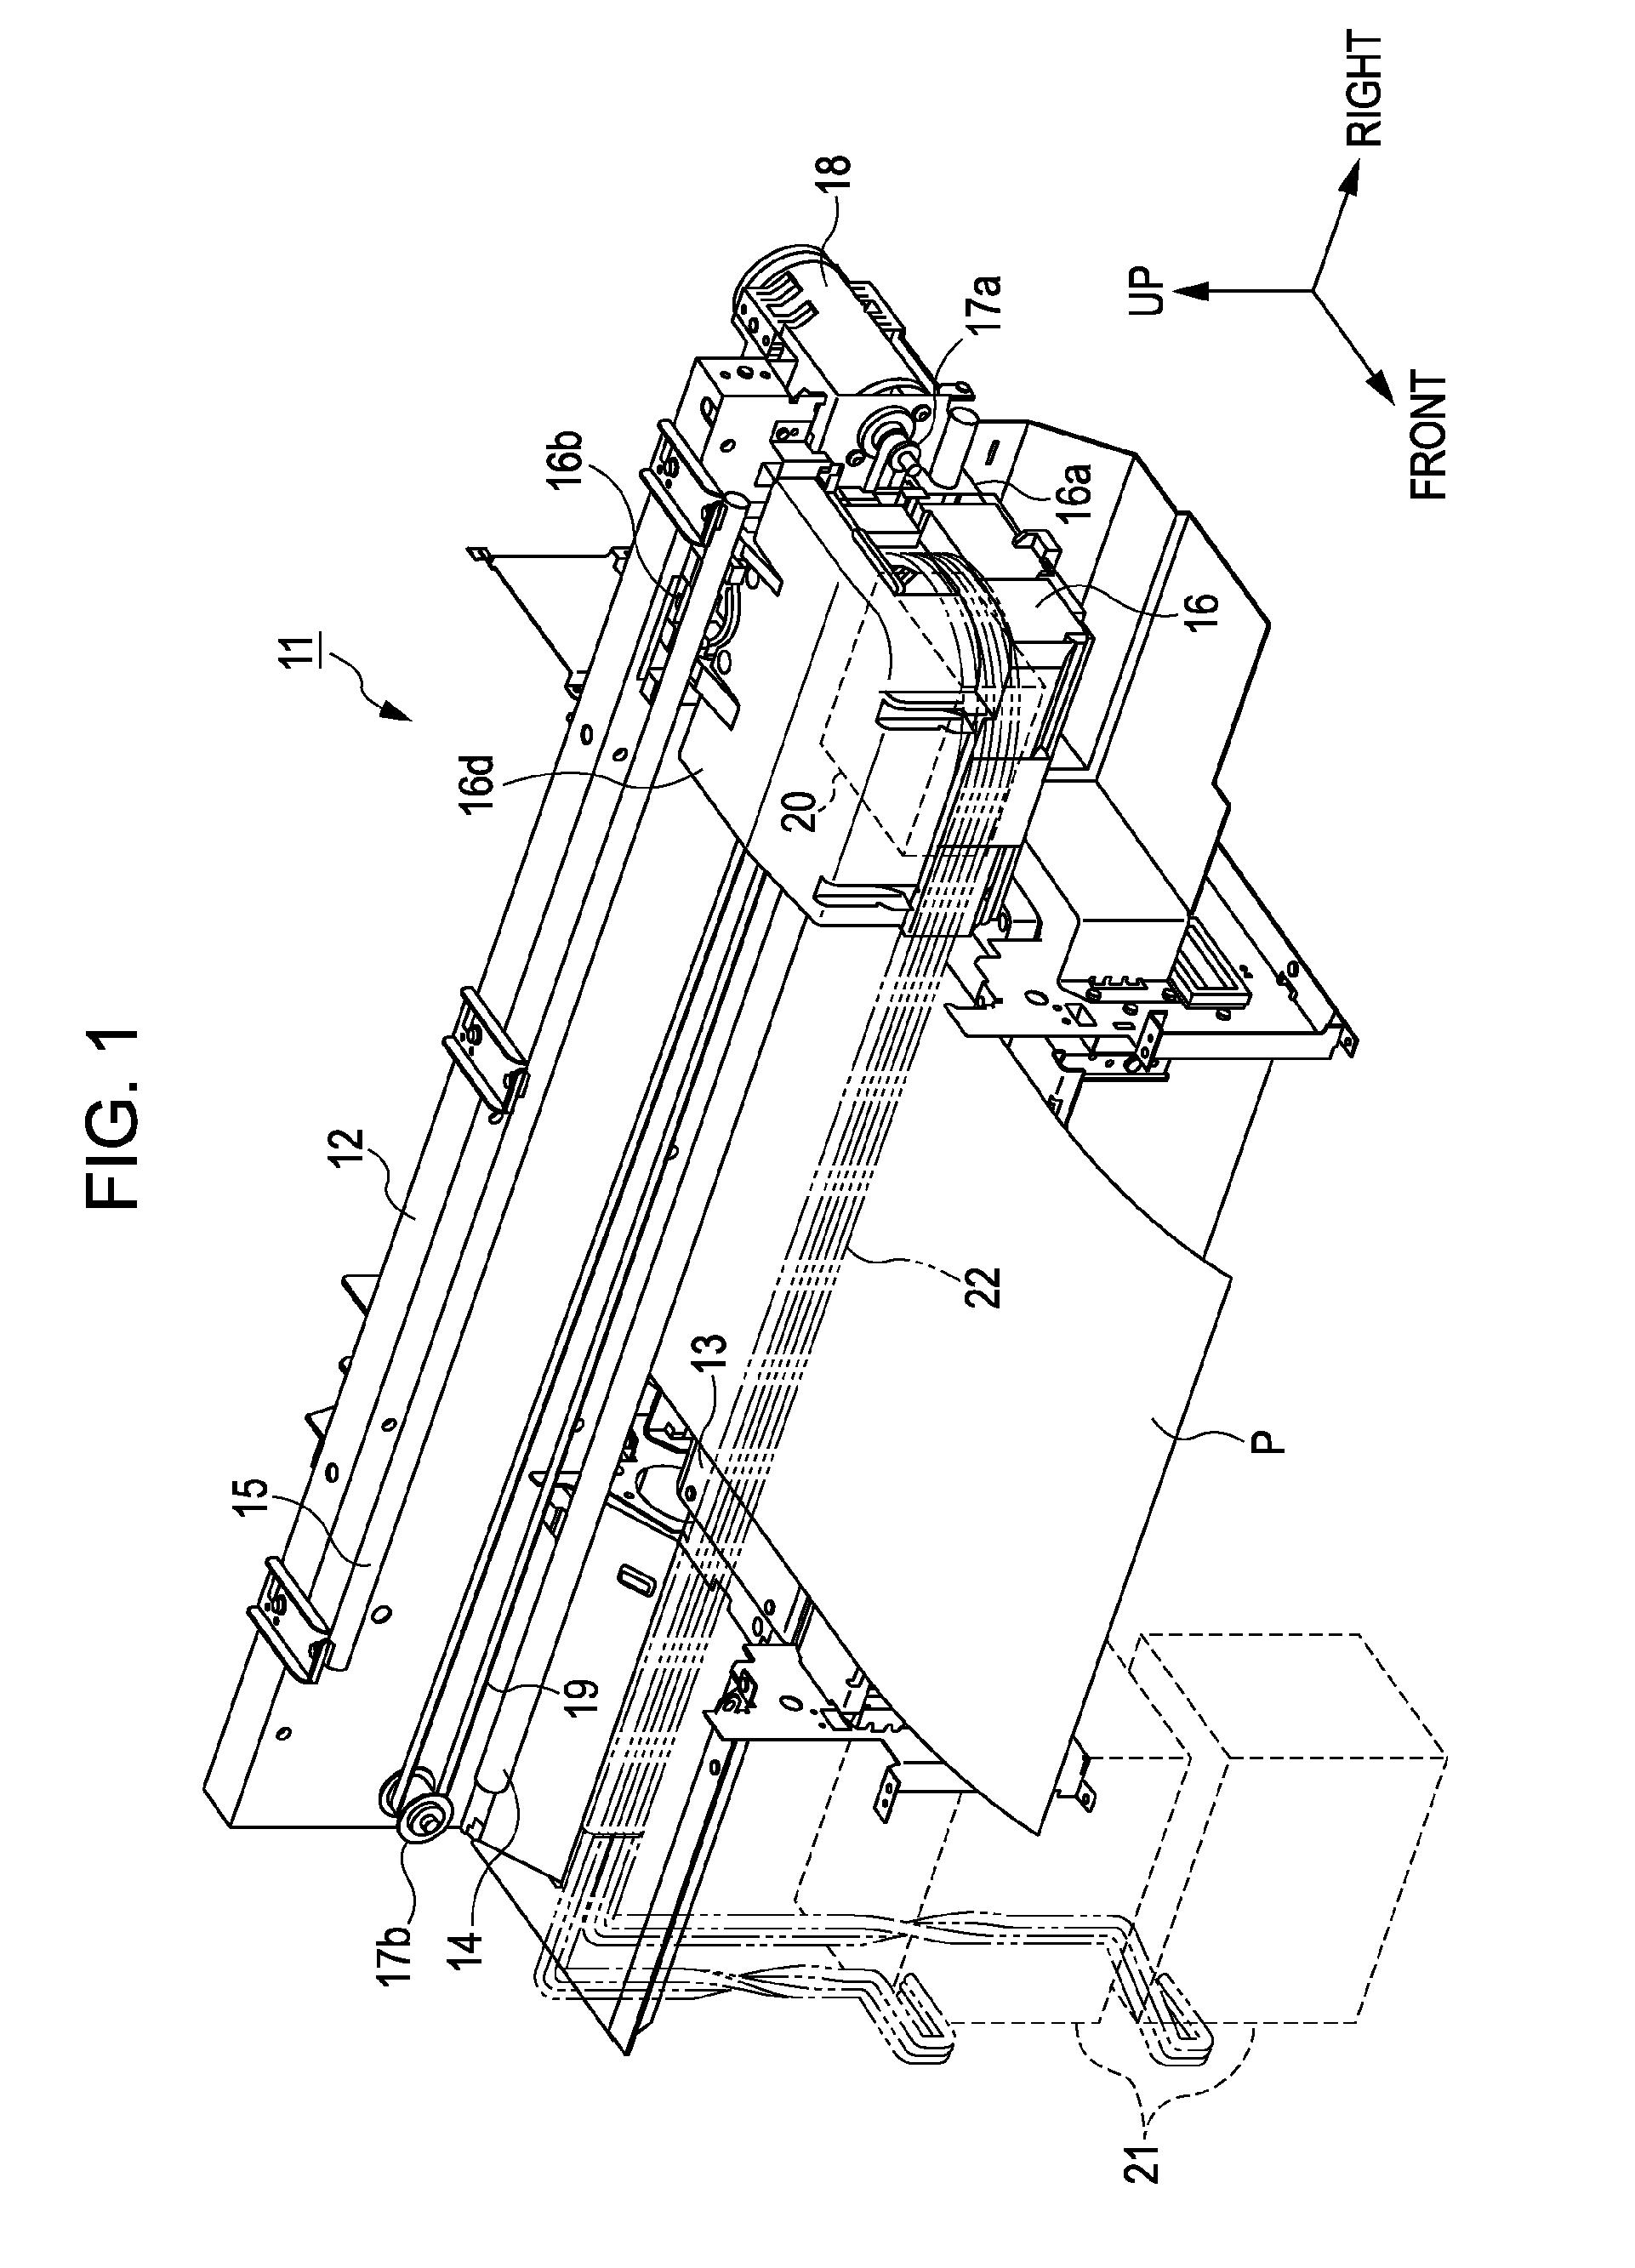 Position adjustment mechanism and recording apparatus